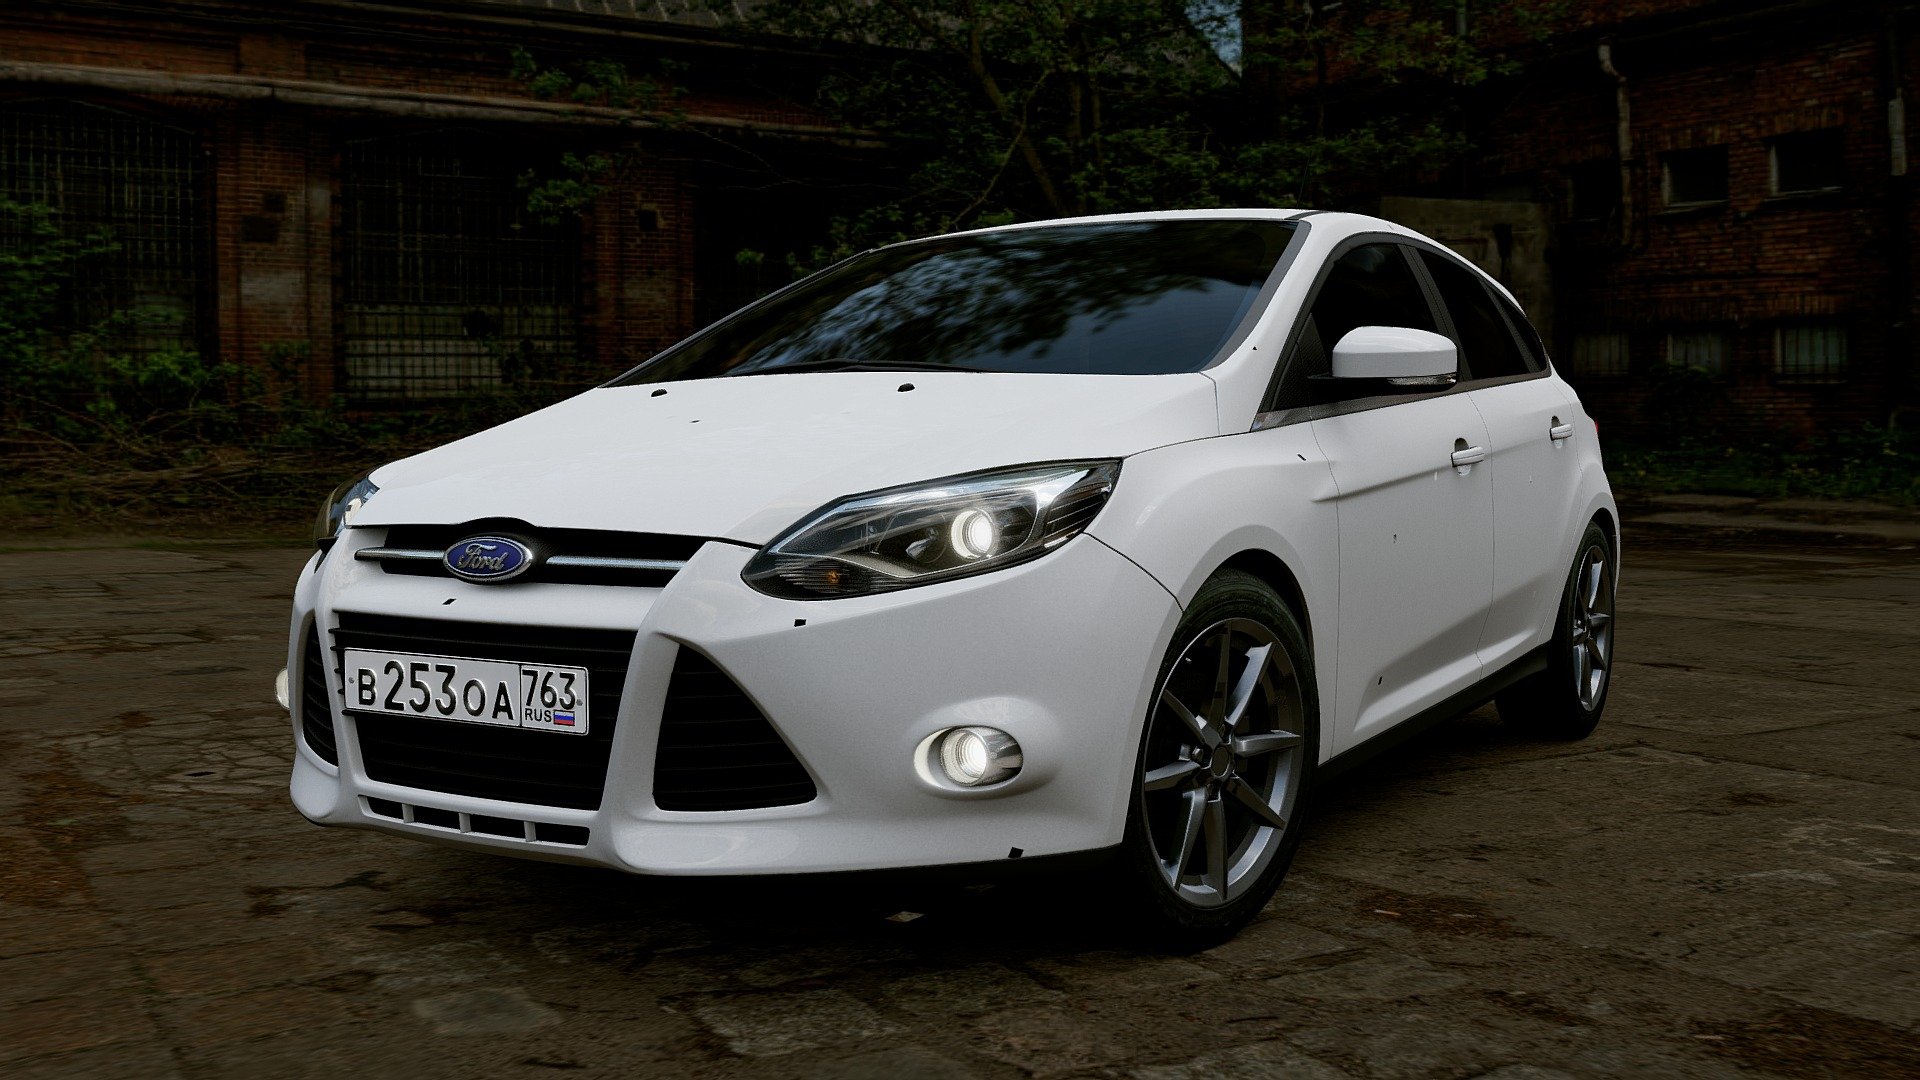 My car, 2013 Ford Focus III 2.0L Titanium - 2013 Ford Focus III - 3D model by Indians 3d model